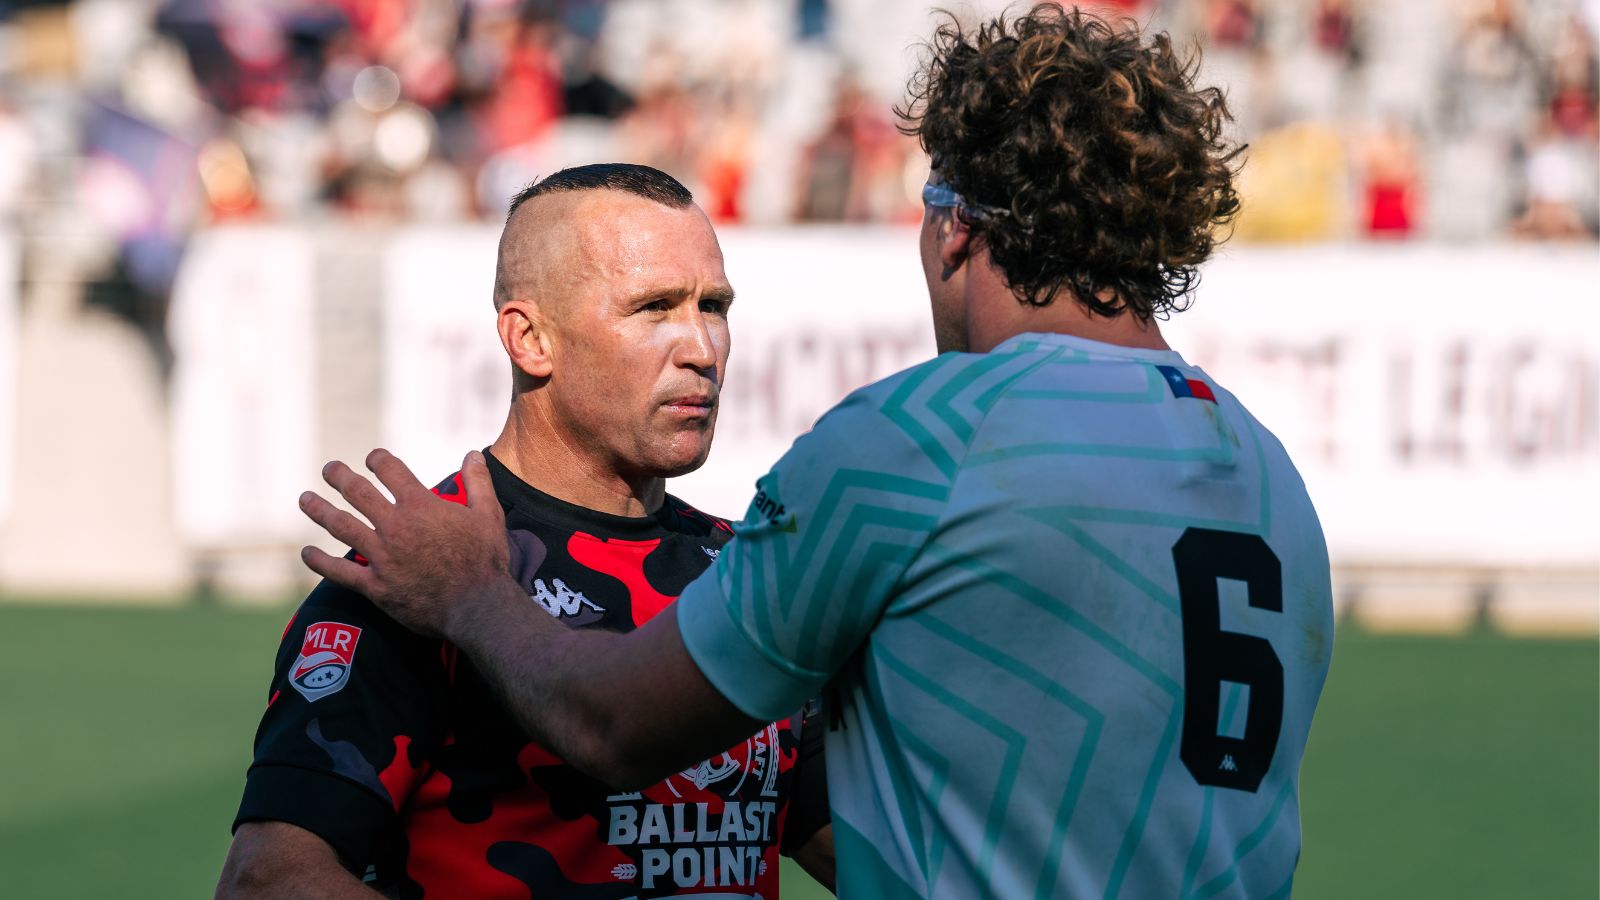 major league rugby: five things we learnt as matt giteau finally debuts and usa eagles squad takes shape